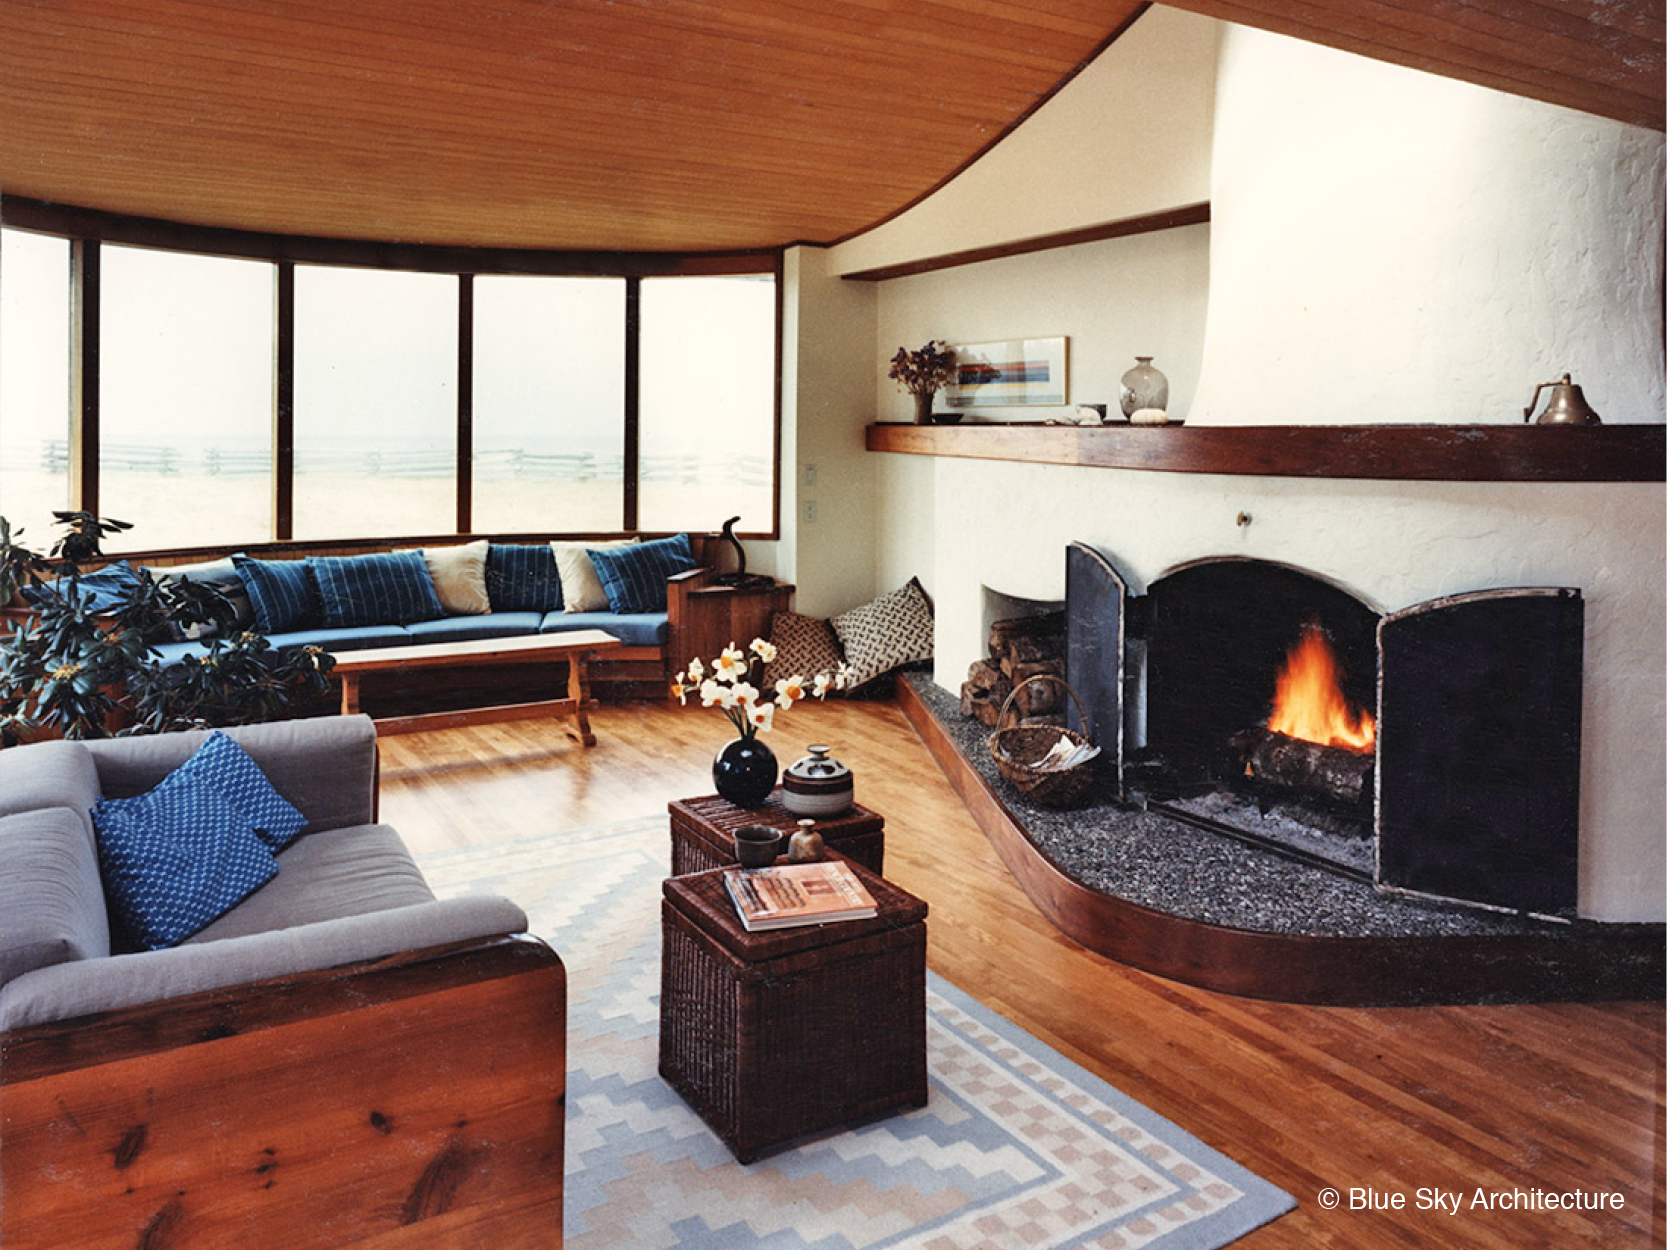 Interior Design with Custom Fireplace and Natural Materials